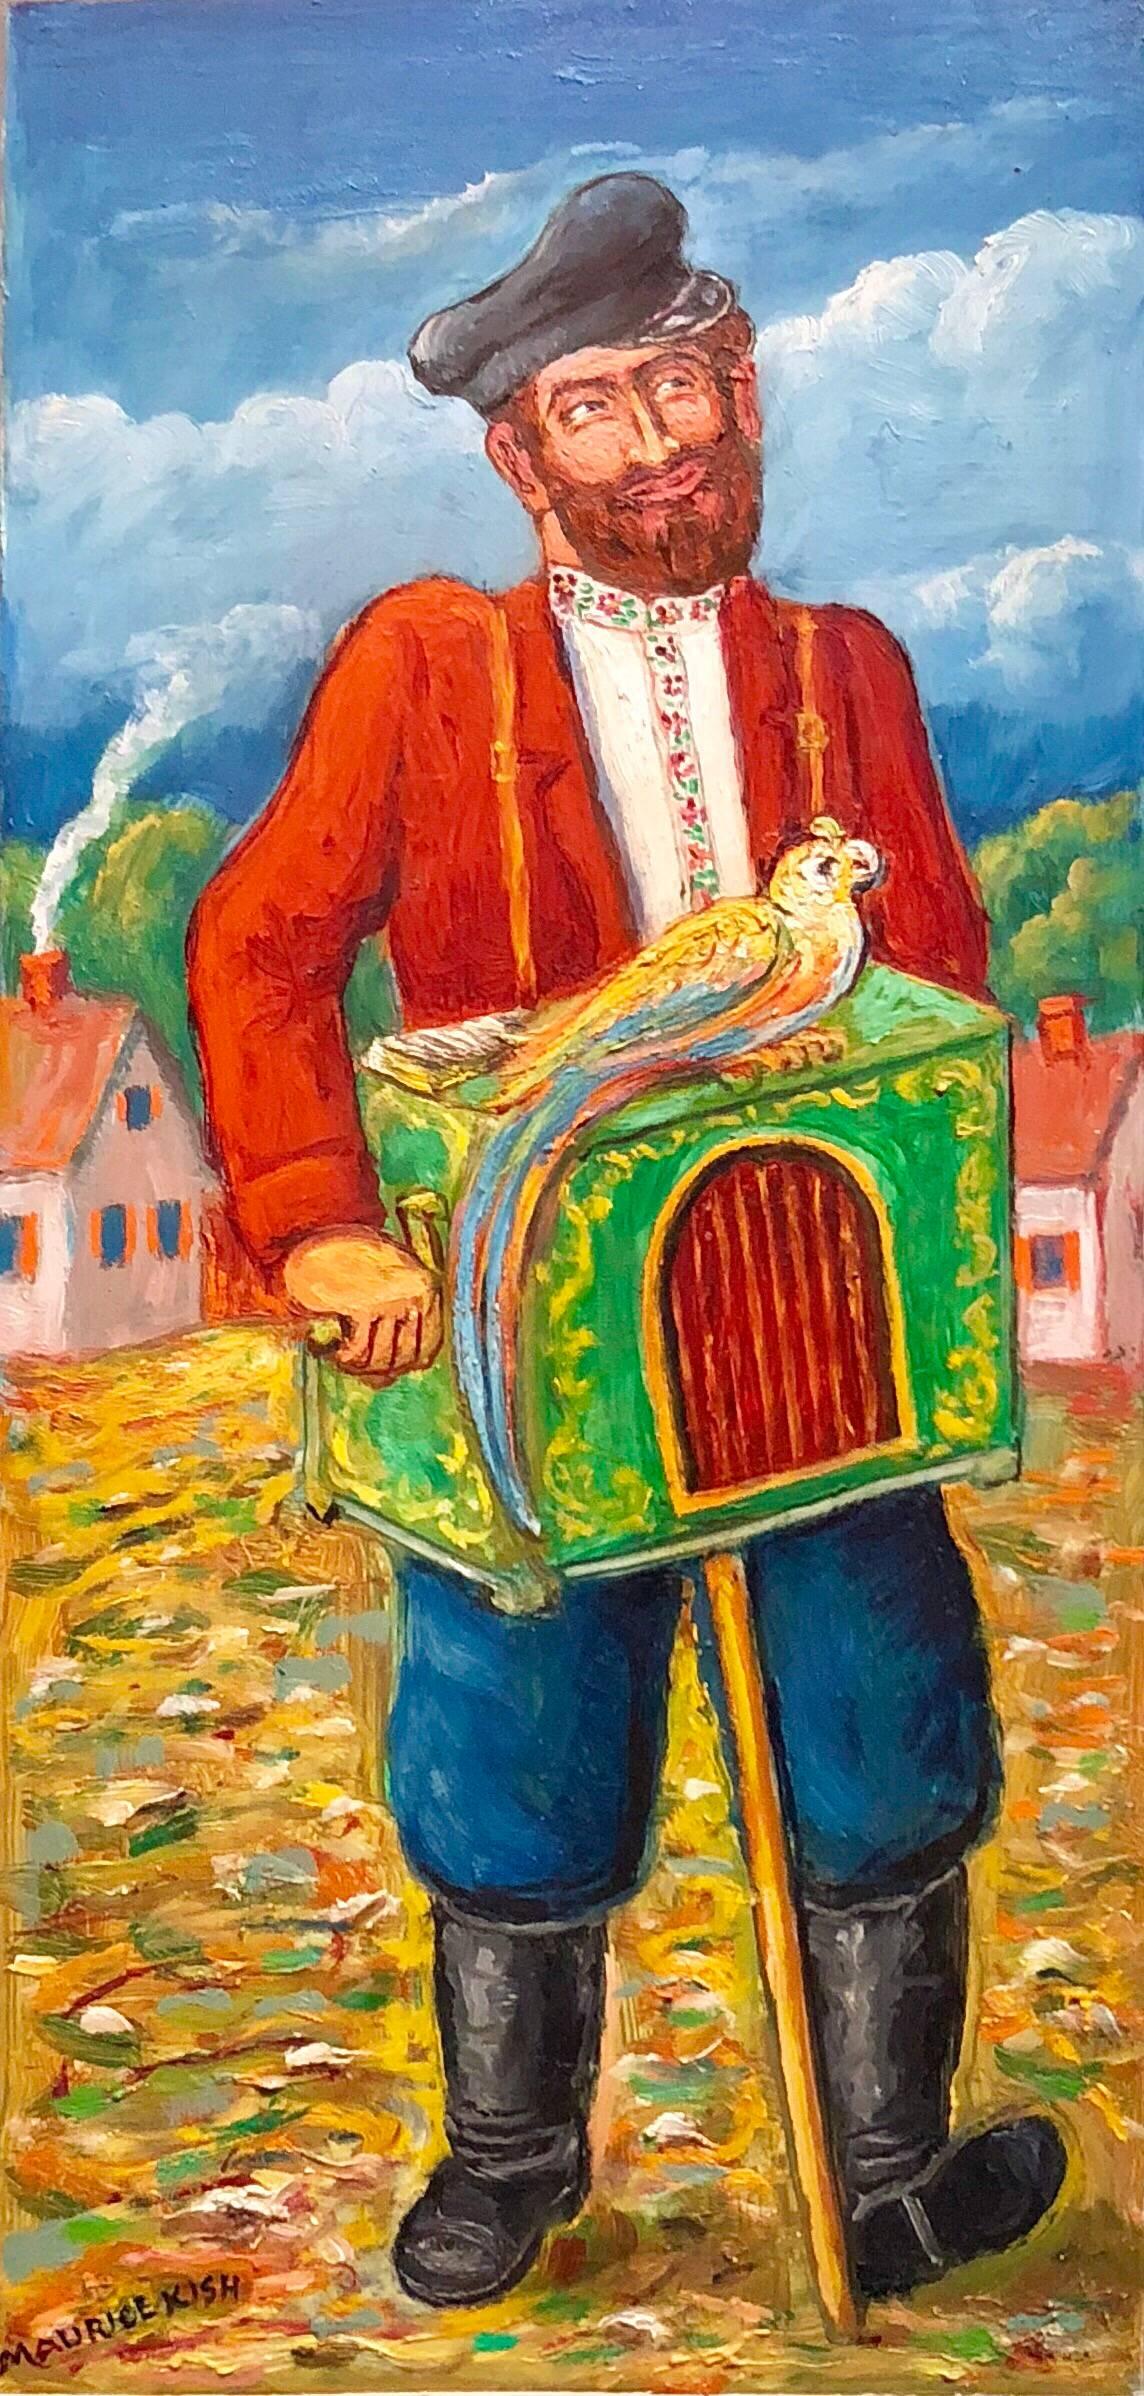 Genre: Modern
Subject: Organ grinder with parrot
Medium: Oil
Surface: Board, size includes artist decorated frame 
Country: United States

The imagery of Maurice Kish (1895-1987), whether factories or carousels, reliably subverts expectations. His